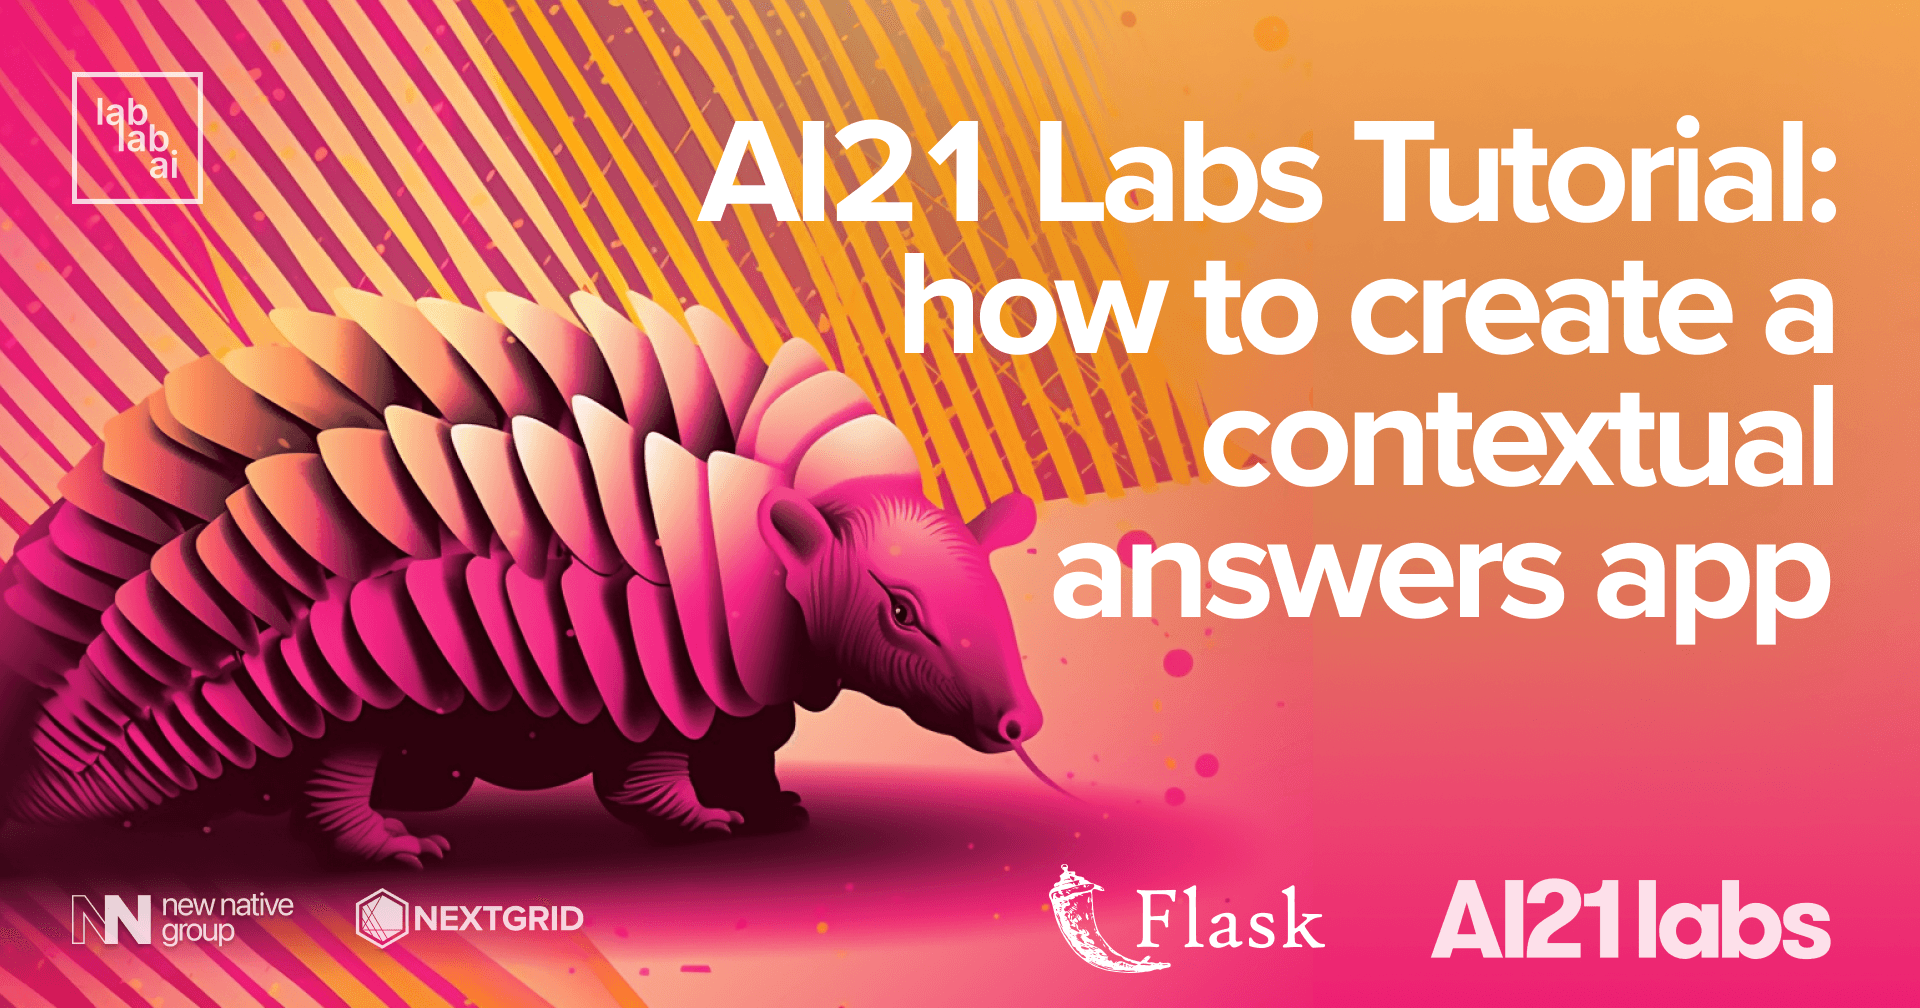 AI21 Labs Tutorial: how to create a contextual answers app